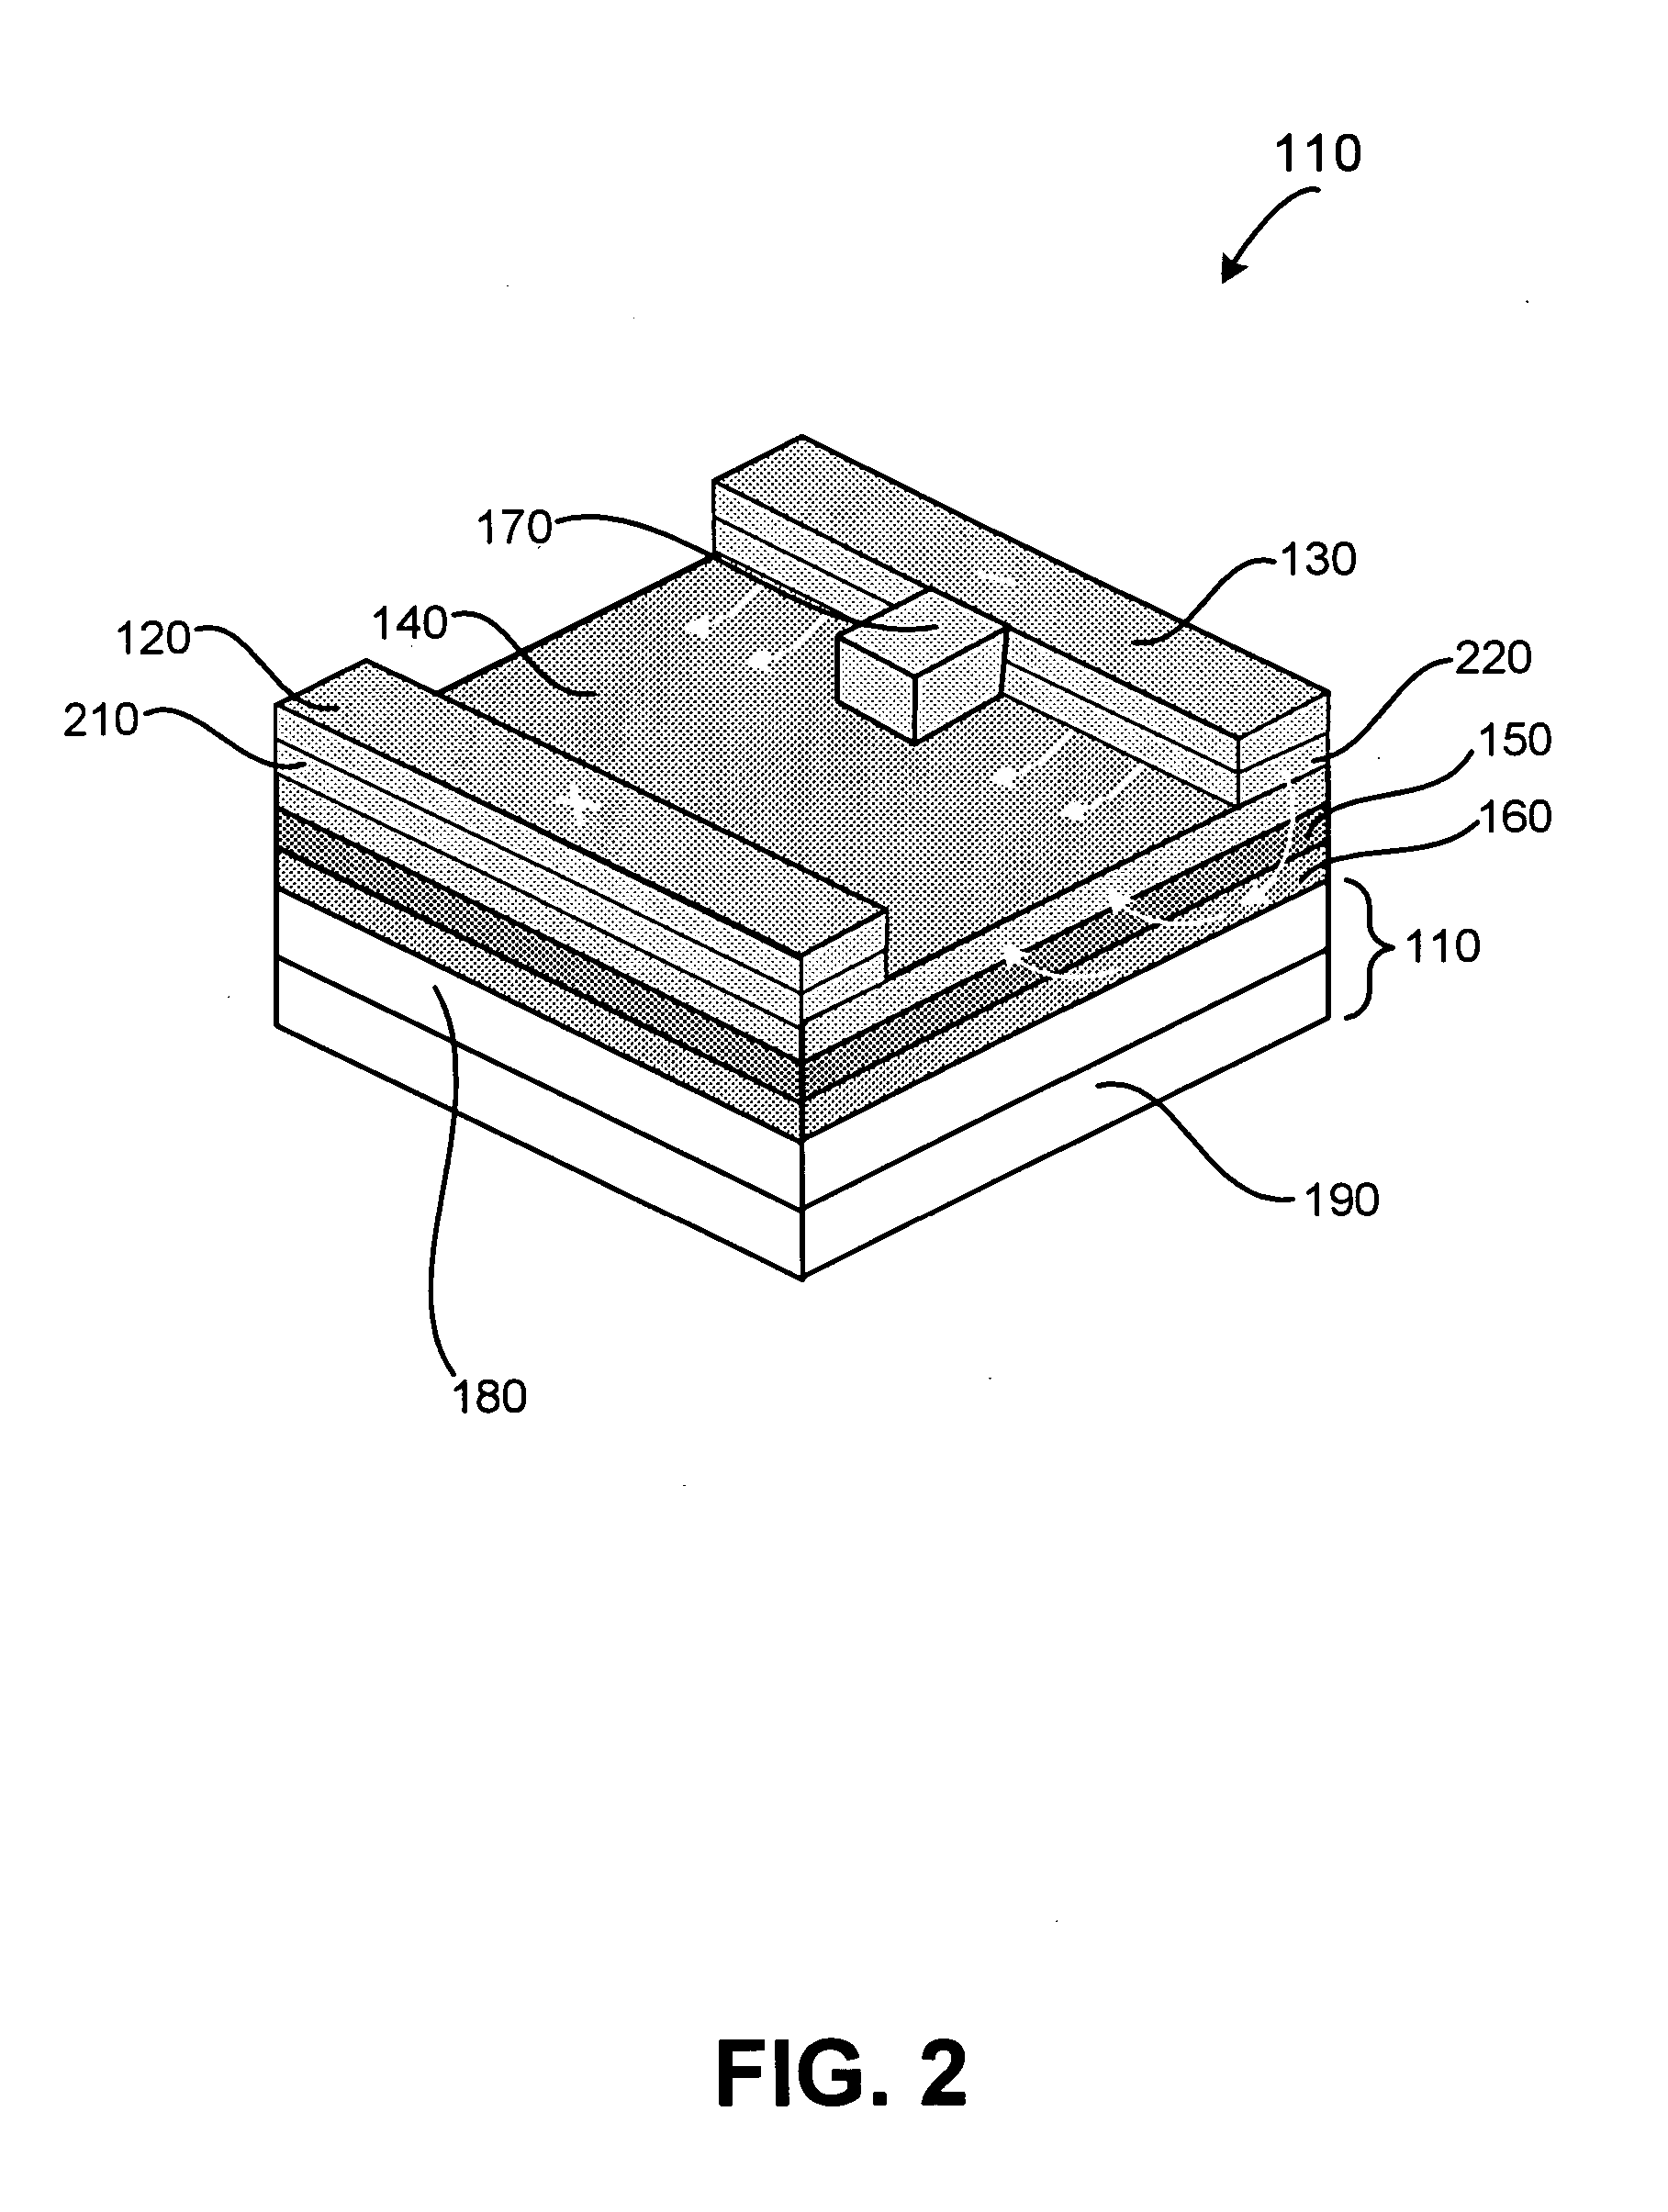 Micromechanical structure, device including the structure, and methods of forming and using same